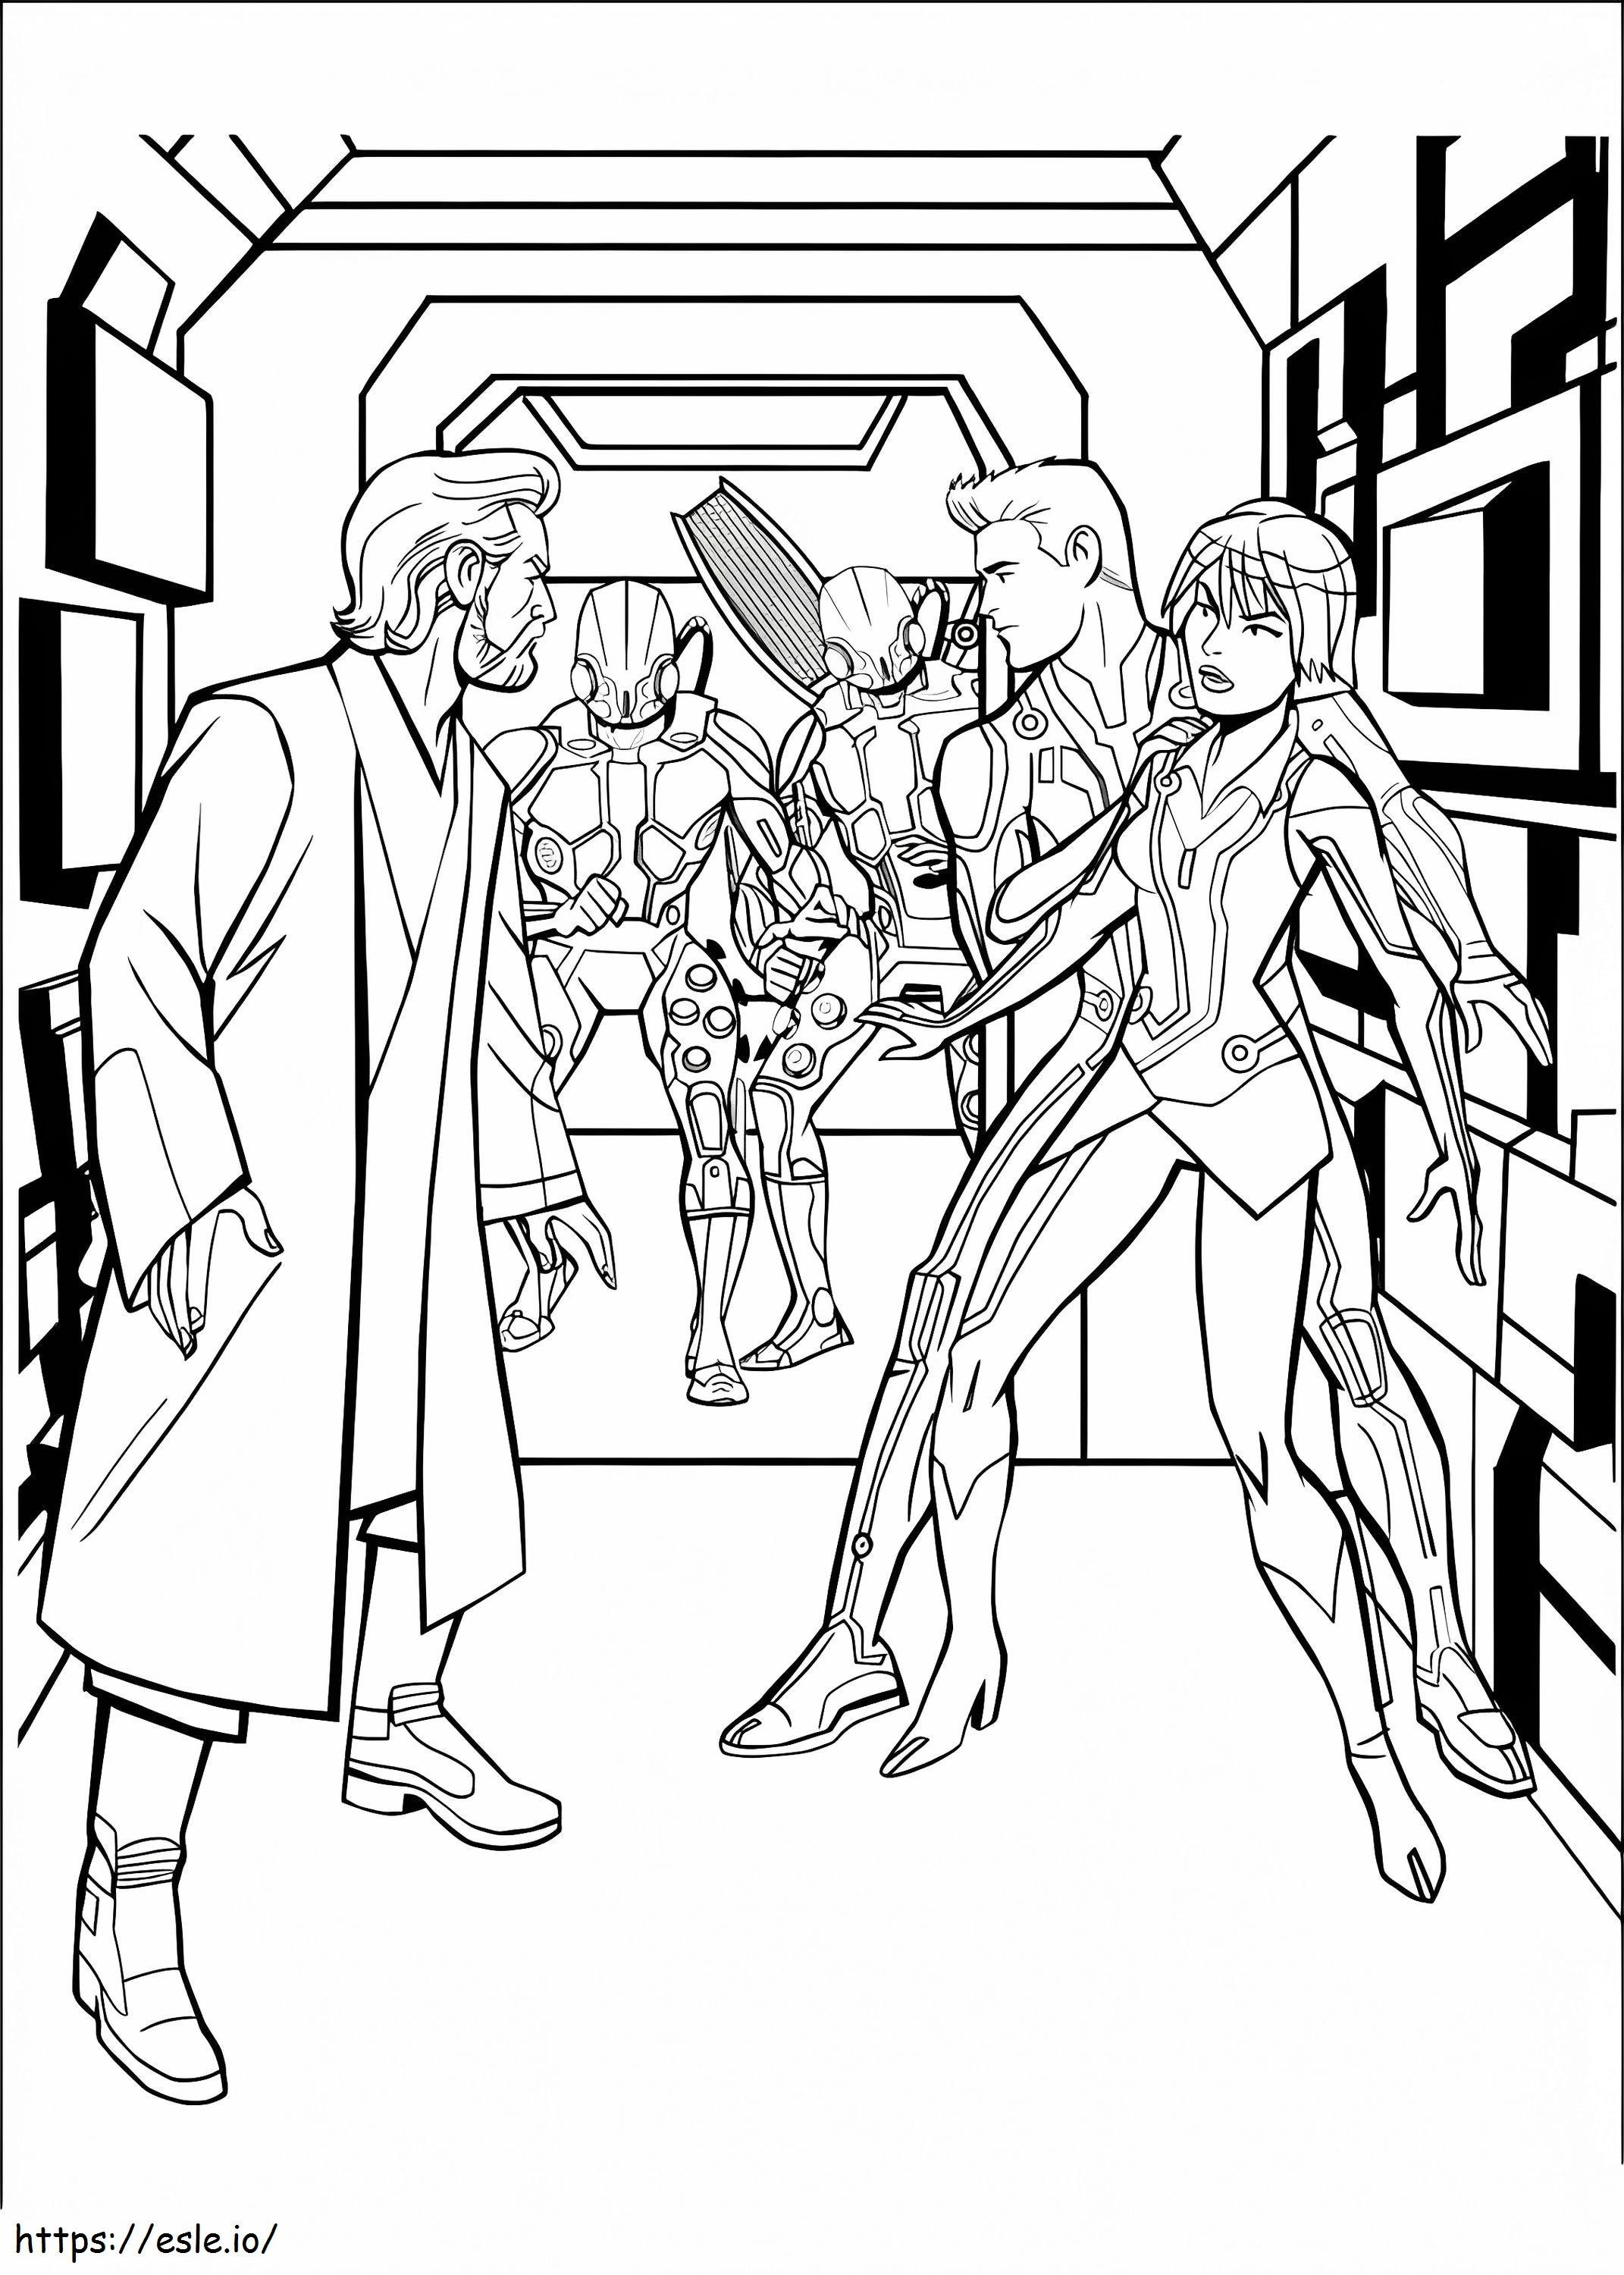 Tron 4 coloring page